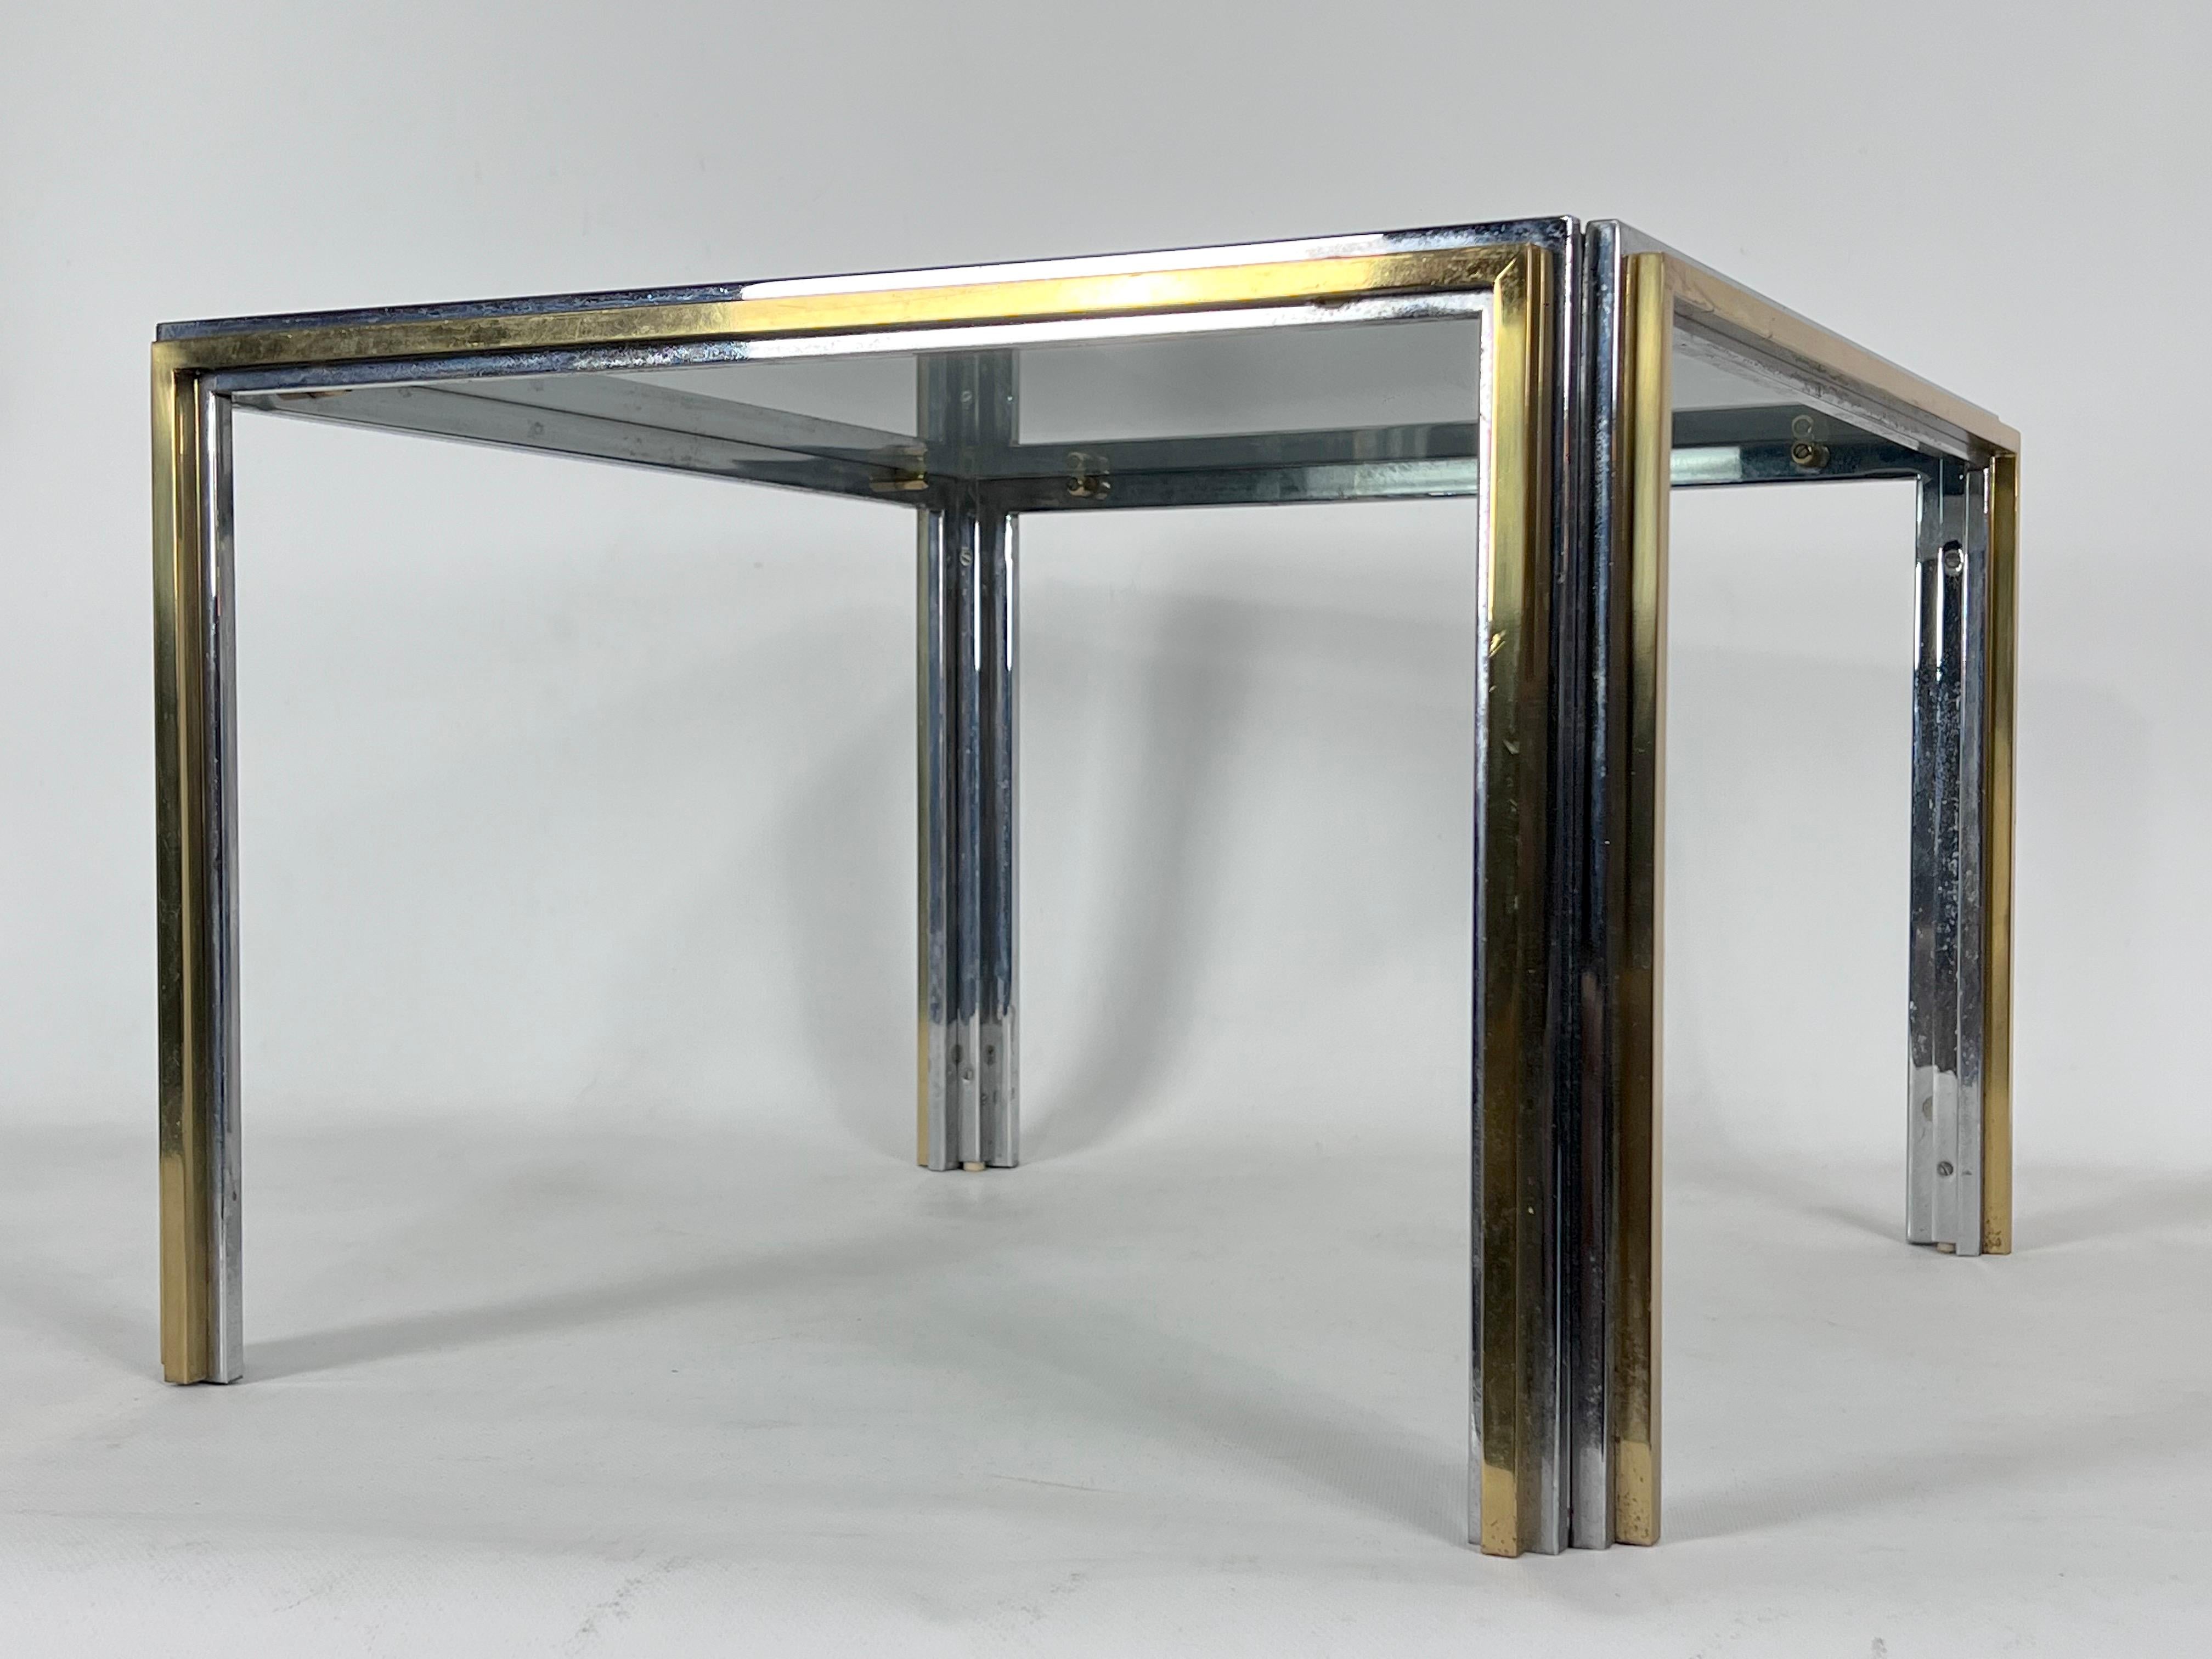 20th Century Mid-Century Modern Chrome and Brass Side Table, Romeo Rega Style, 70s For Sale